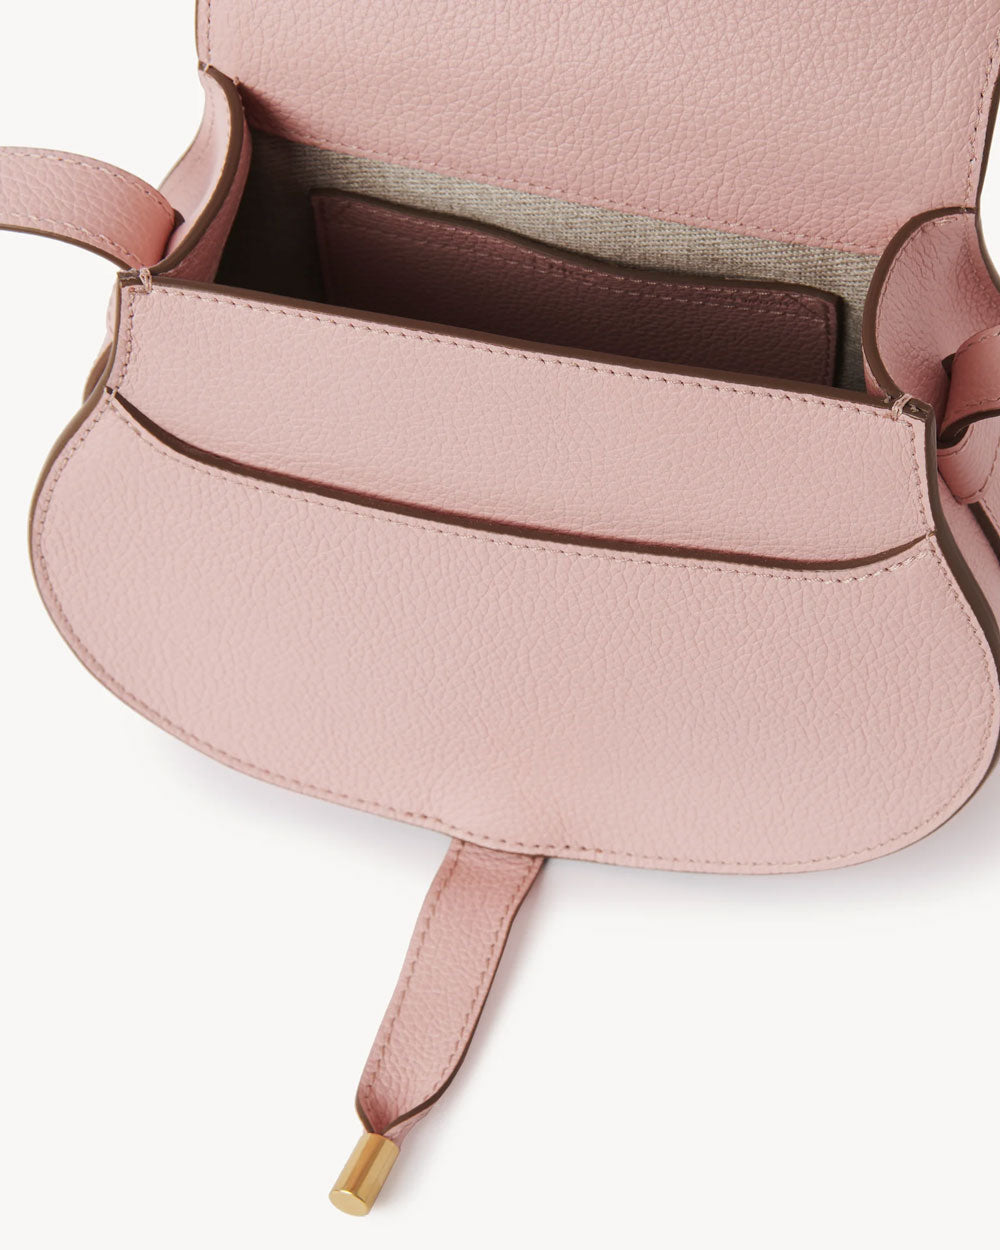 Marcie Small Saddle Bag in Blossom Pink